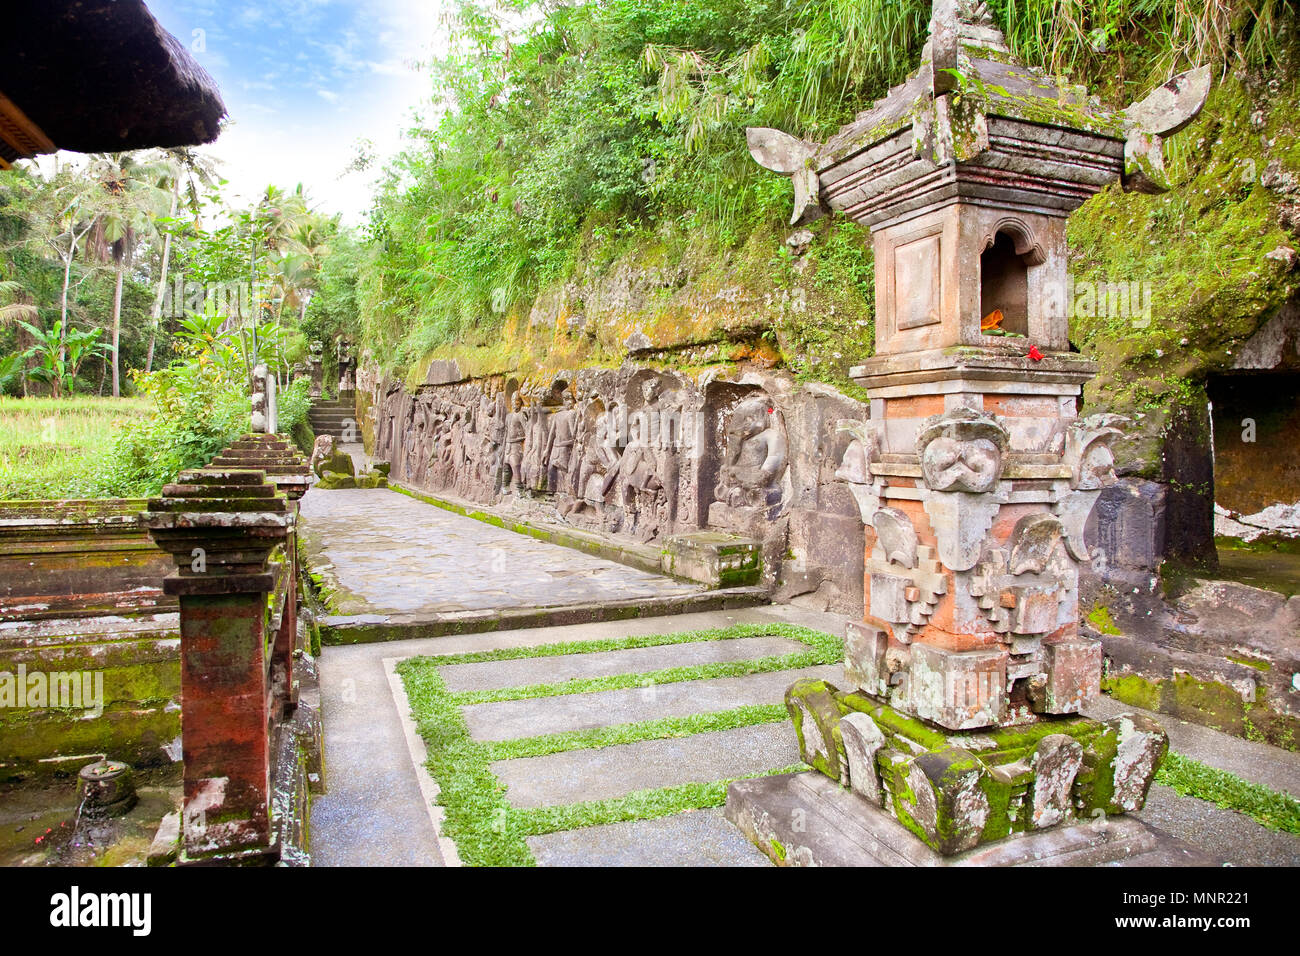 Yeh Pulu - Famous carved cliff face, Ubud, Bali, Indonesia Stock Photo